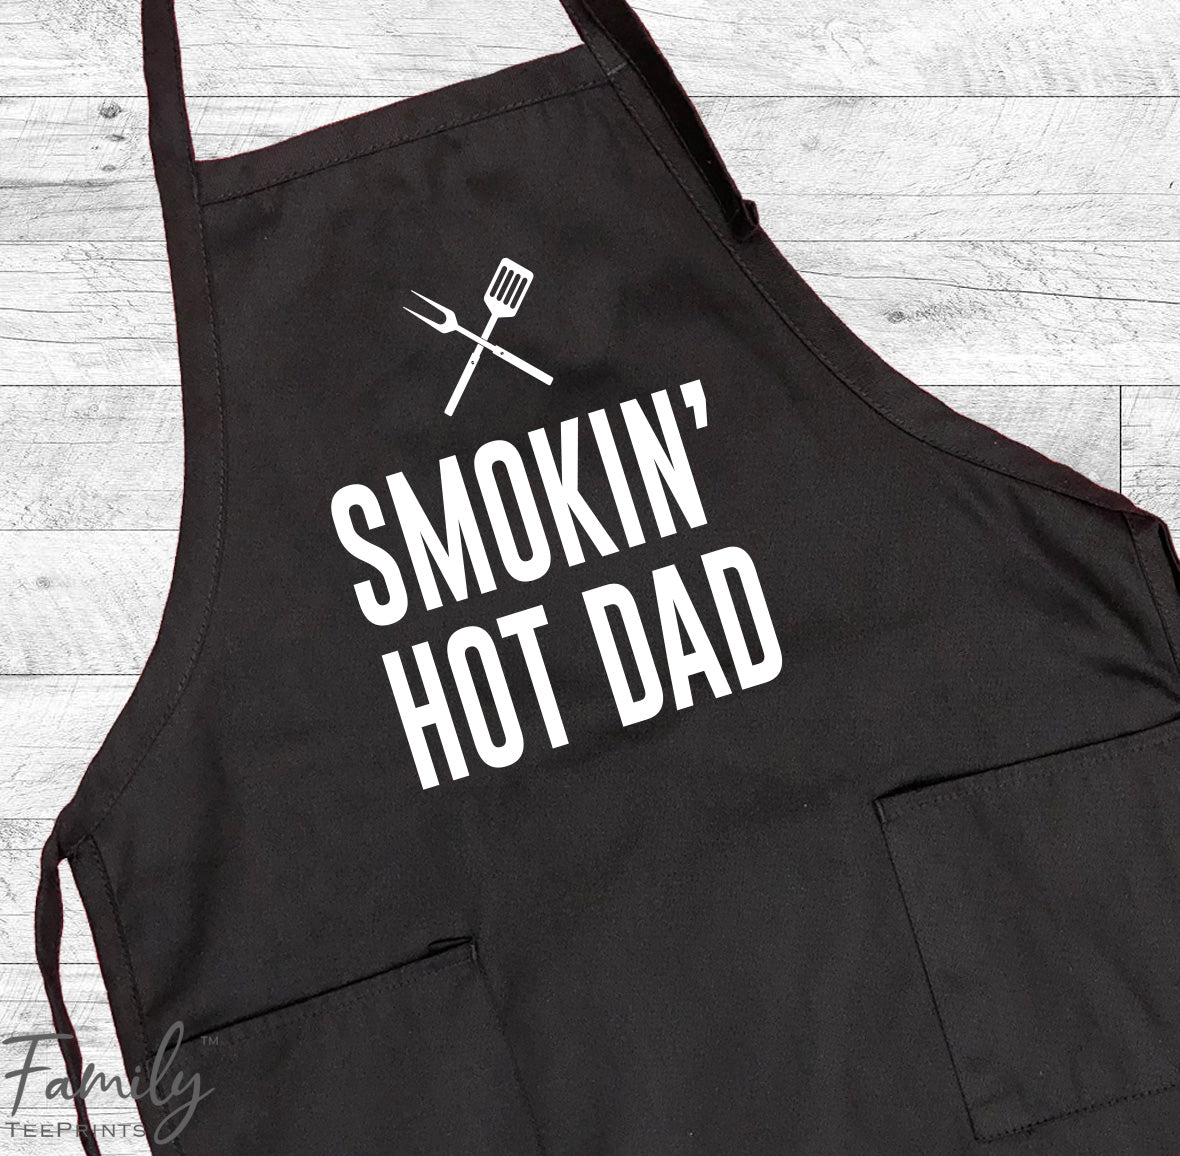 Funny for Men Kitchen Aprons, Women With 3 Pockets-birthday Gifts for Mom,  Wife, Friend, Dad, Husband BBQ Kitchen Cooking Baking Chef Apron 